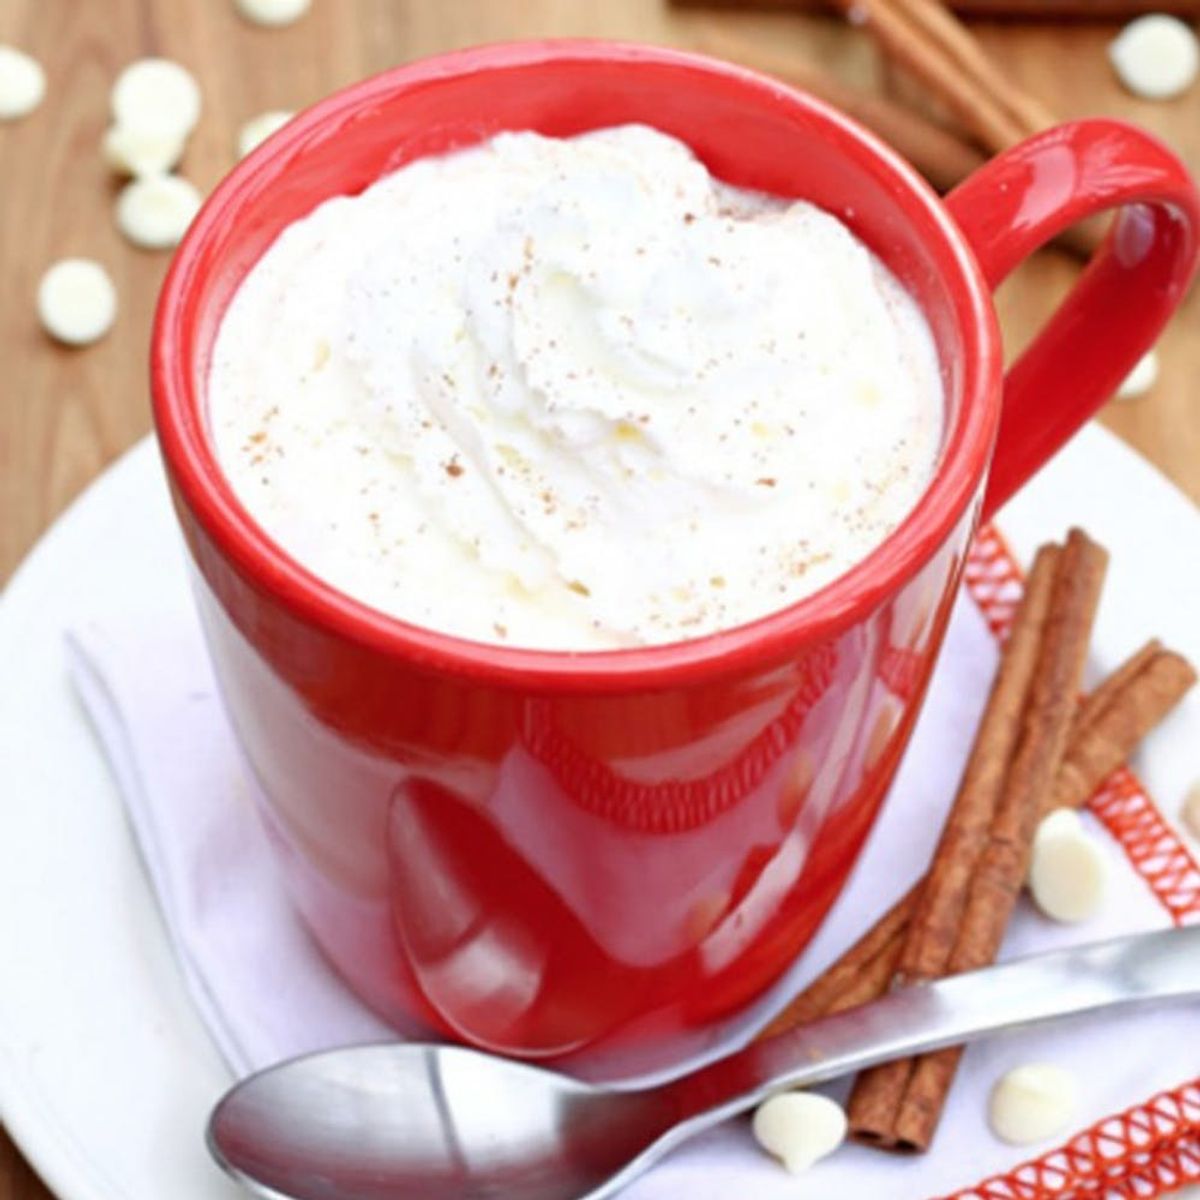 15 Next-Level Hot Cocoa Recipes to Sip On